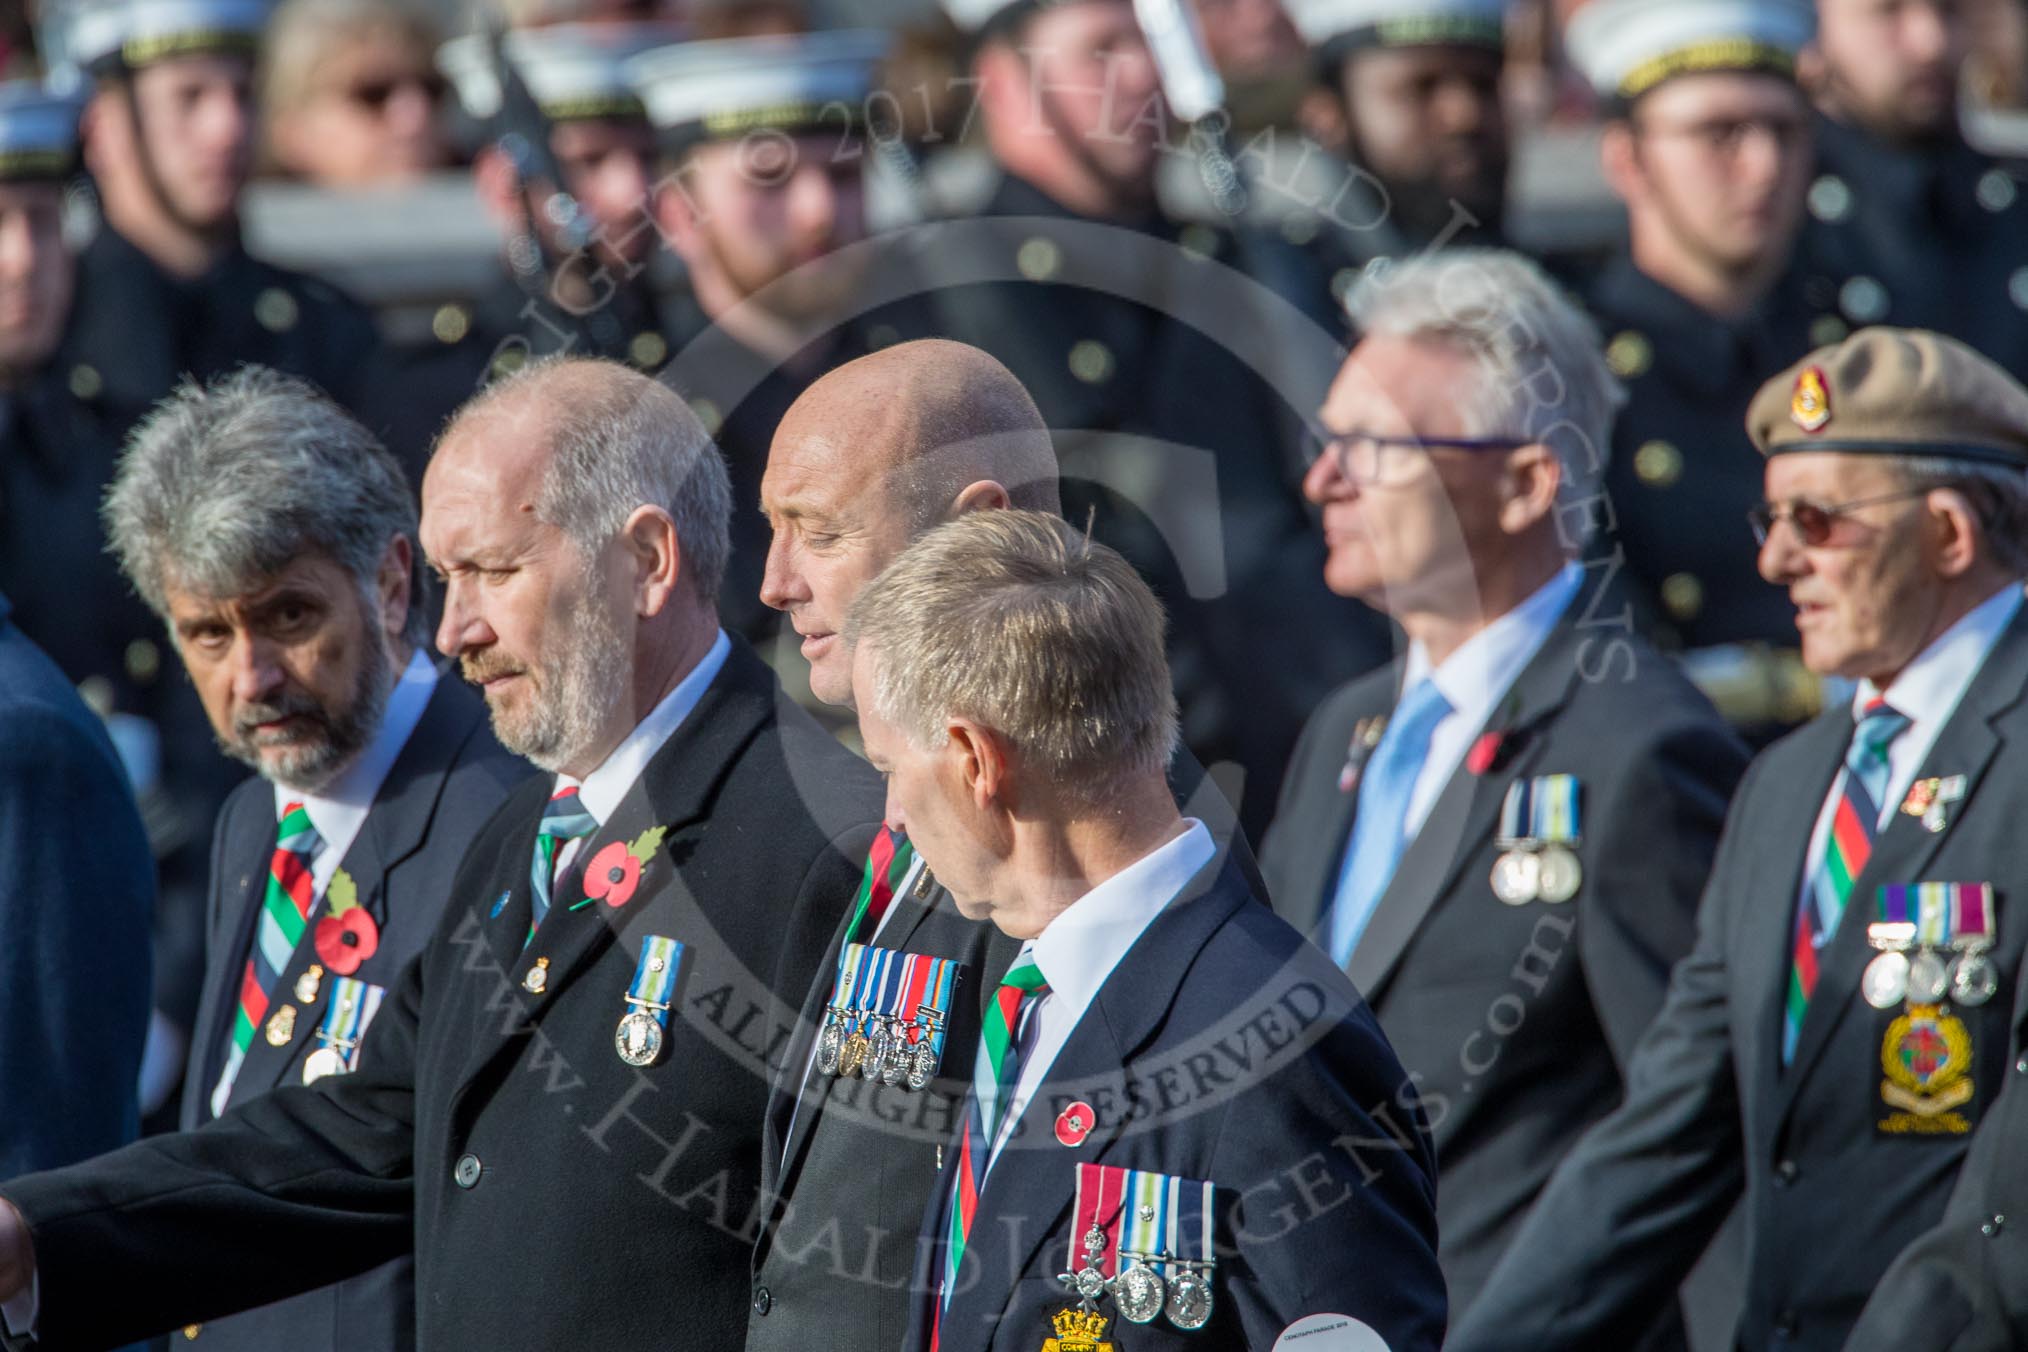 The South Atlantic Medal Association 1982 (Group F17, 150 members) during the Royal British Legion March Past on Remembrance Sunday at the Cenotaph, Whitehall, Westminster, London, 11 November 2018, 11:52.